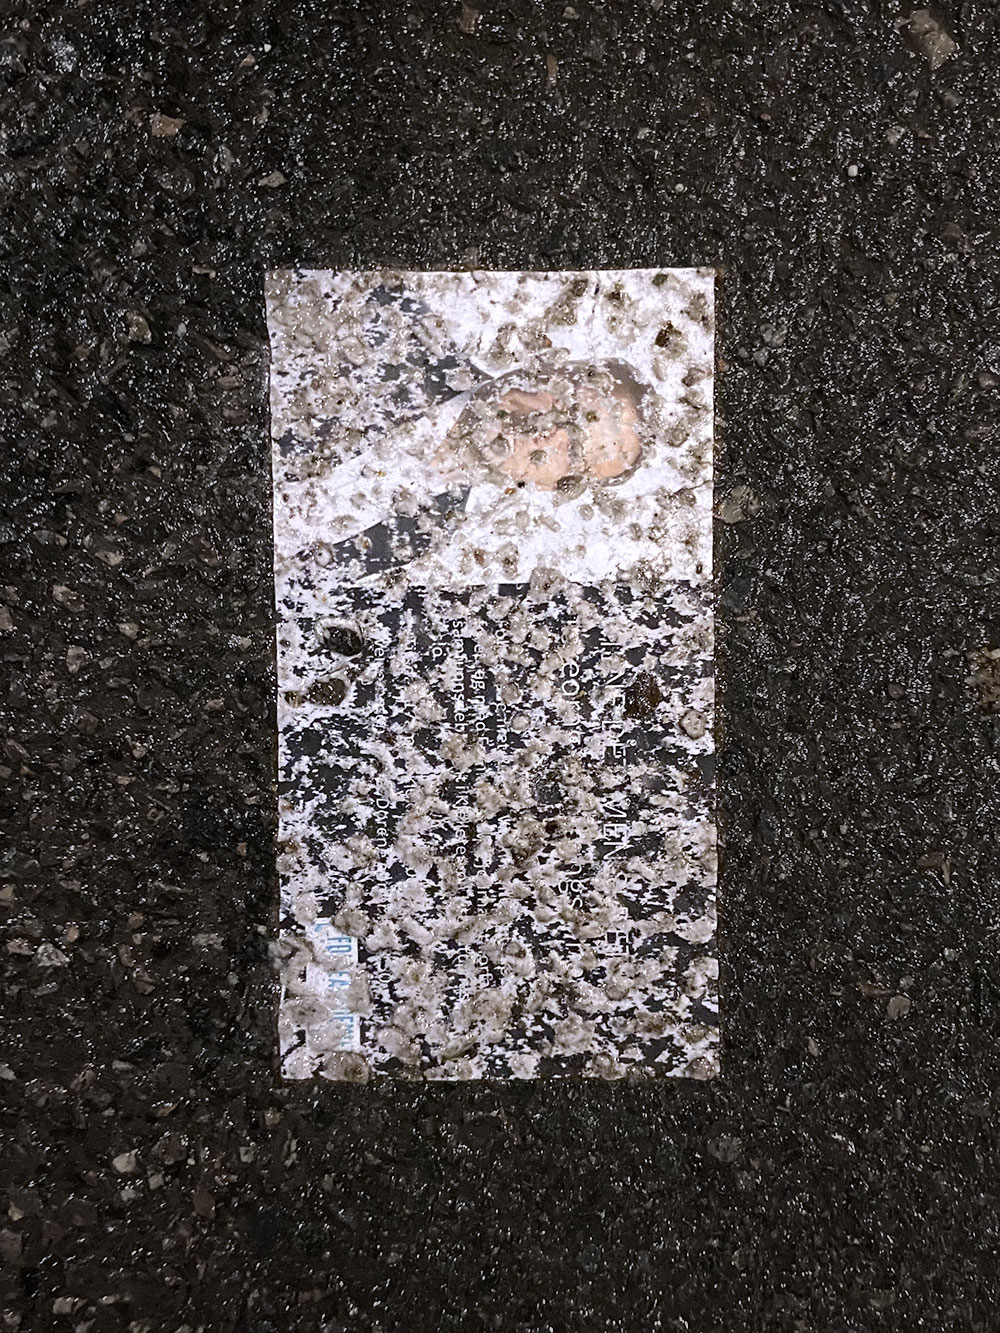 smashed business card with a white man's face on it